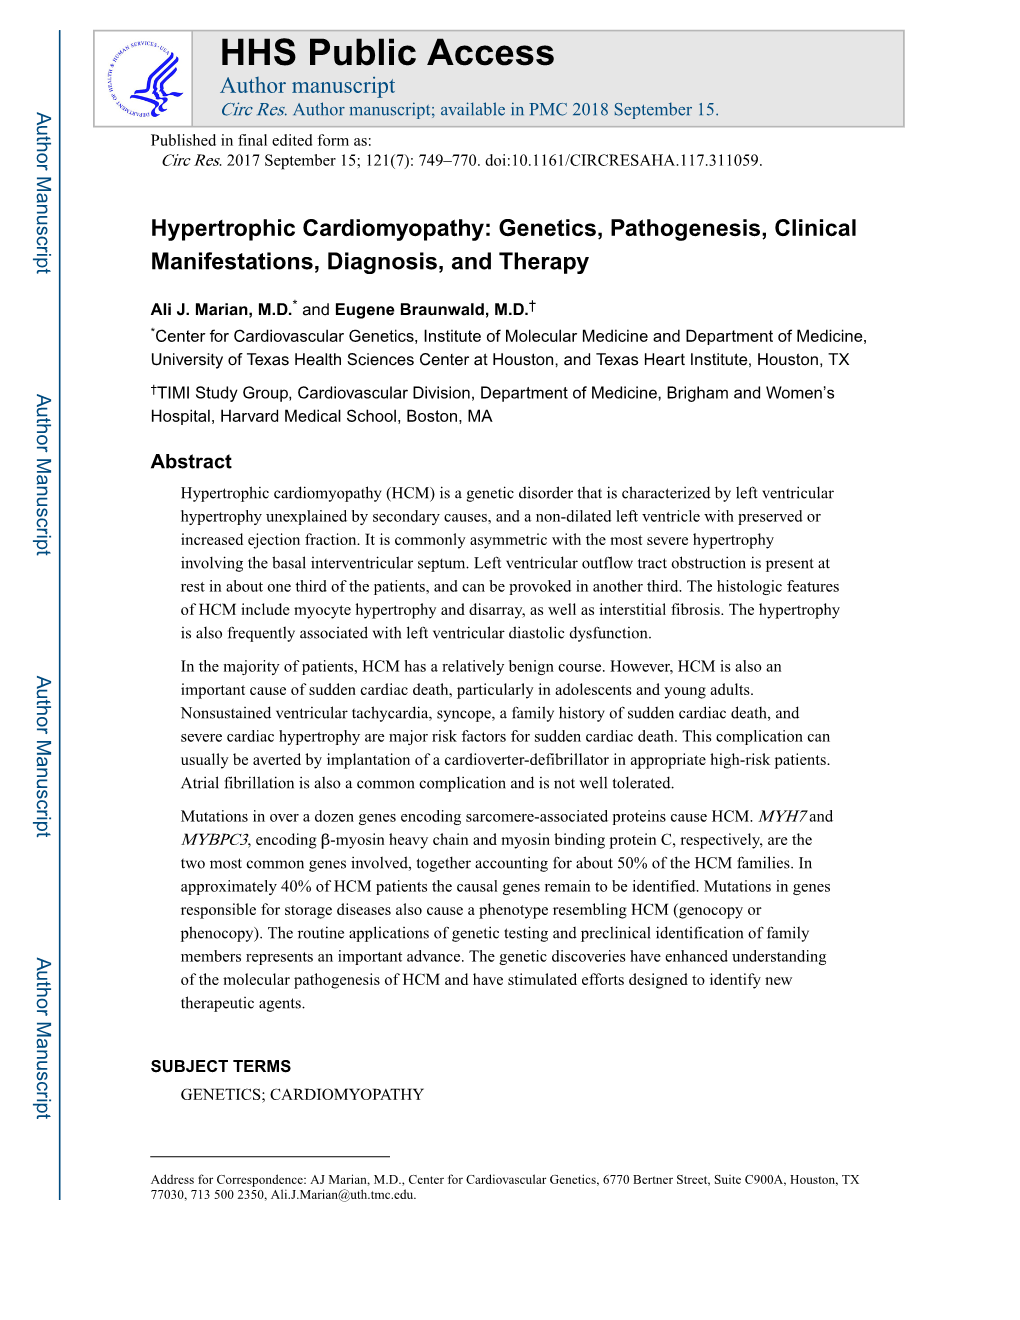 Hypertrophic Cardiomyopathy: Genetics, Pathogenesis, Clinical Manifestations, Diagnosis, and Therapy